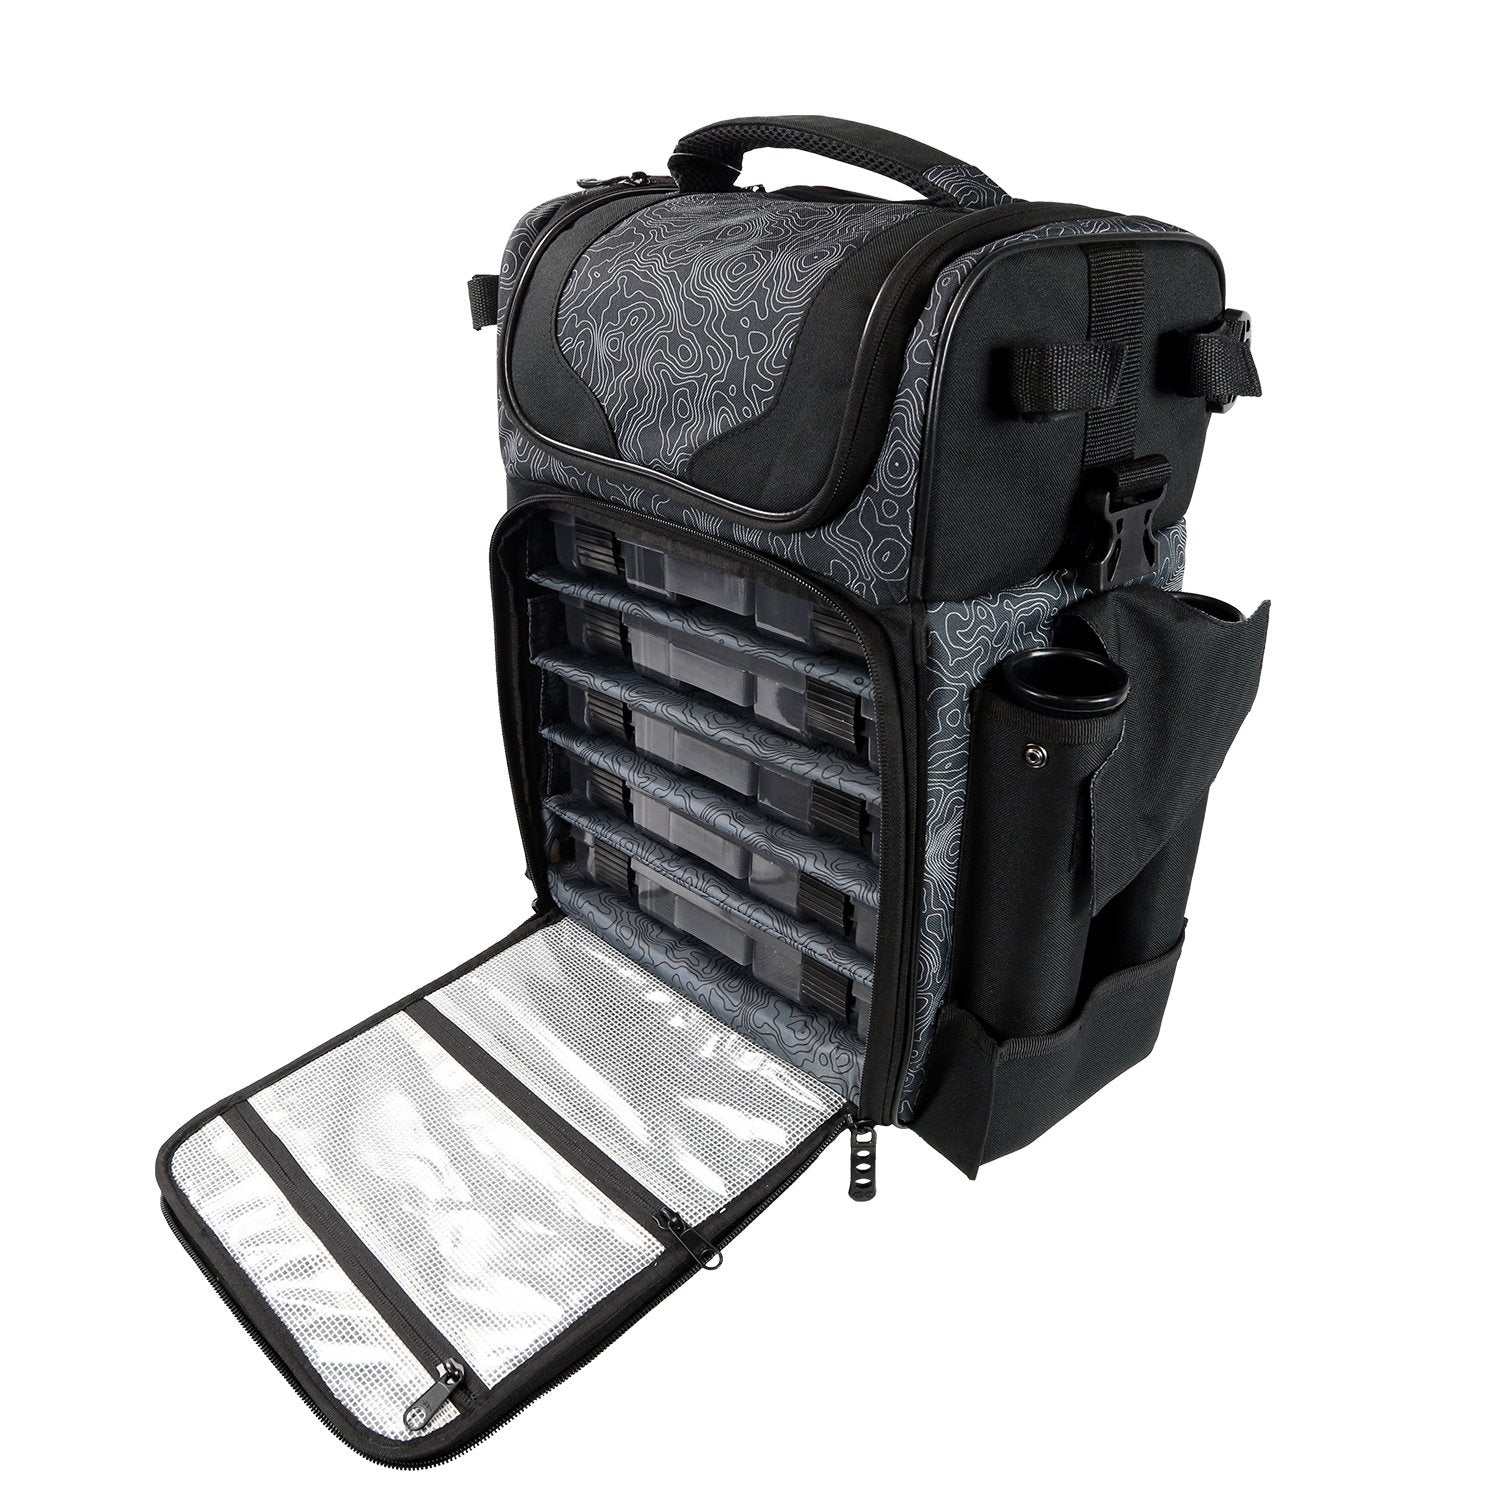 Pack all your GEAR in one Bag -- Piscifun Waterproof Tackle Bag 